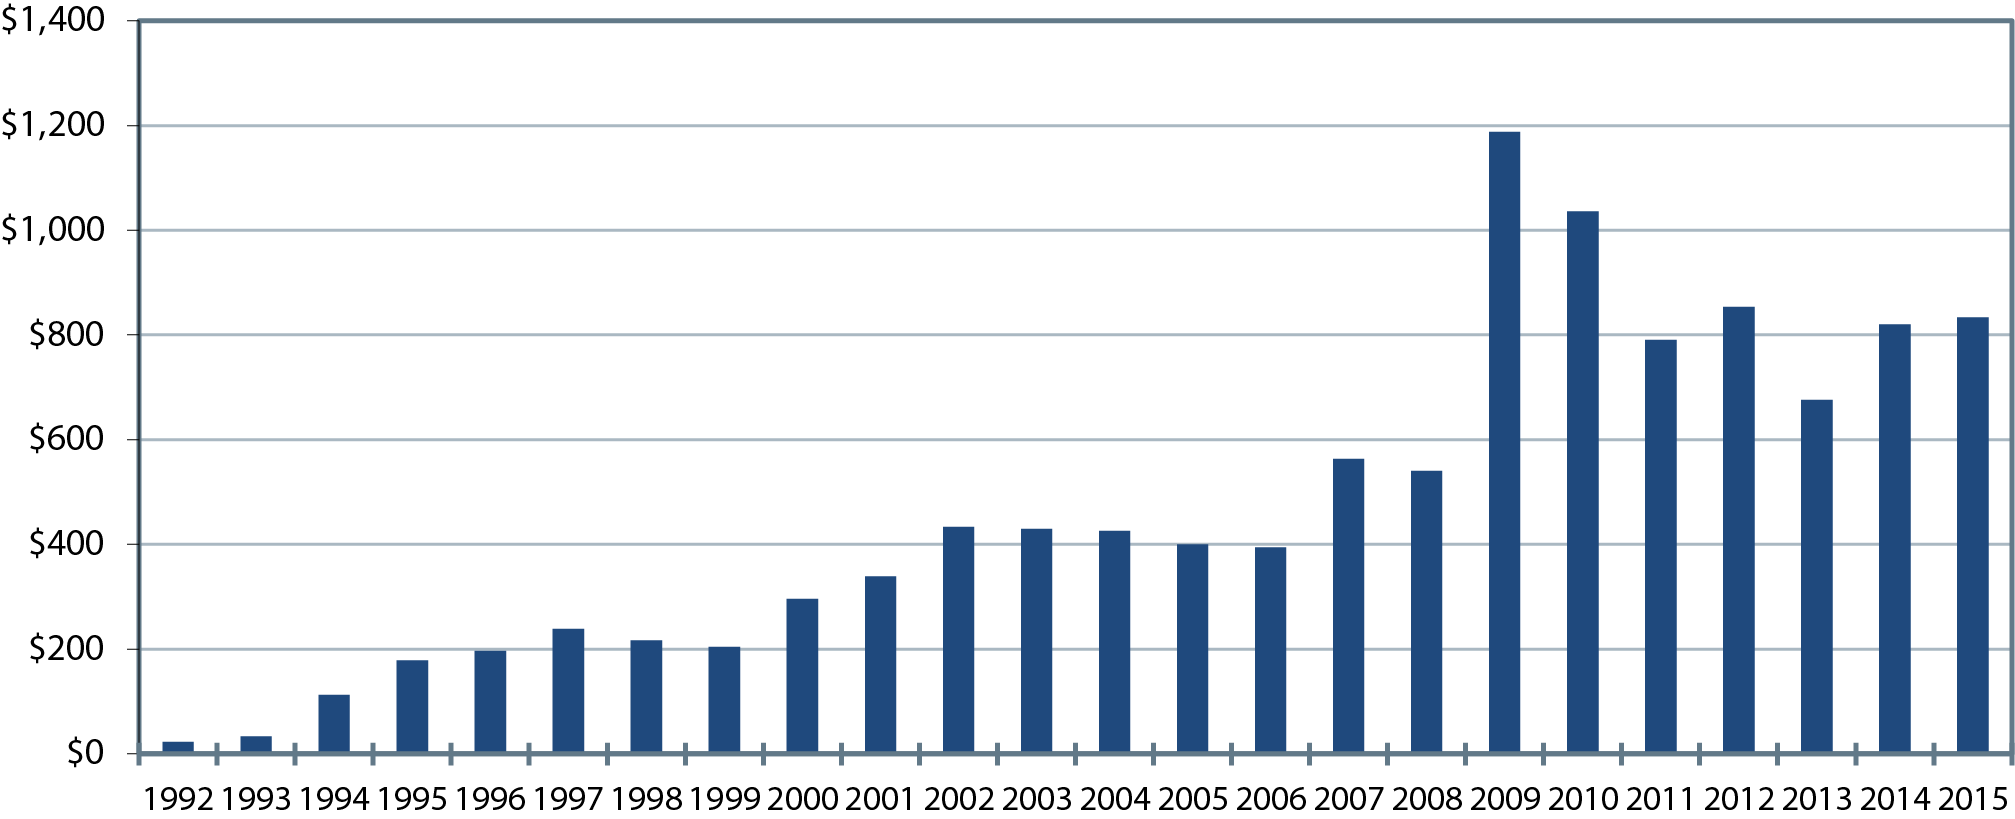 A bar chart plots total federal obligations in millions of dollars for projects related to bicycling and pedestrians for 1992 through 2014. In 1992, obligations for new projects totaled $22.9 million. Obligations peaked in 2009 when the total amount for new projects was $1.188 billion. Since 2009, total obligations have fluctuated, but generally trended down. In 2014, the most recent year for which data are available, the amount obligated was $820 million. Source: FHWA Fiscal Management Information System.